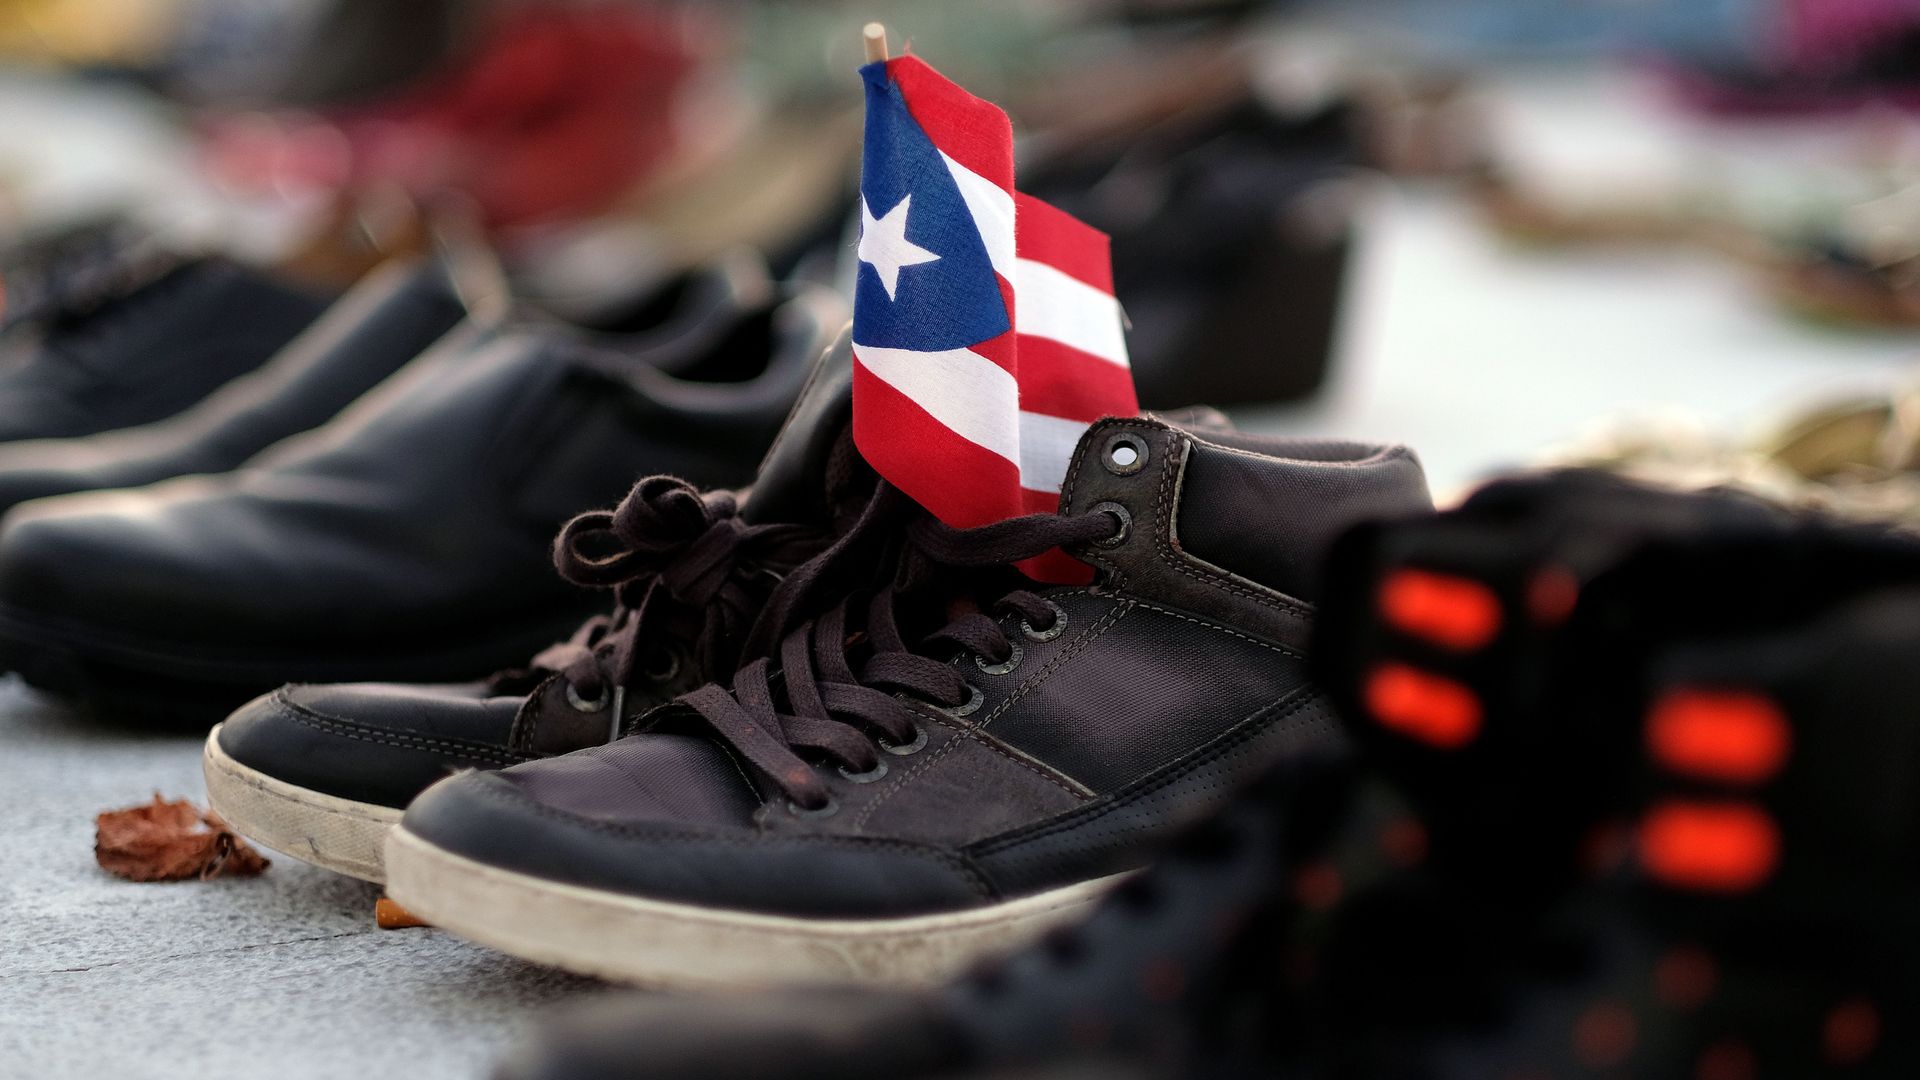 A Puerto Rican flag in a pair of shoes.